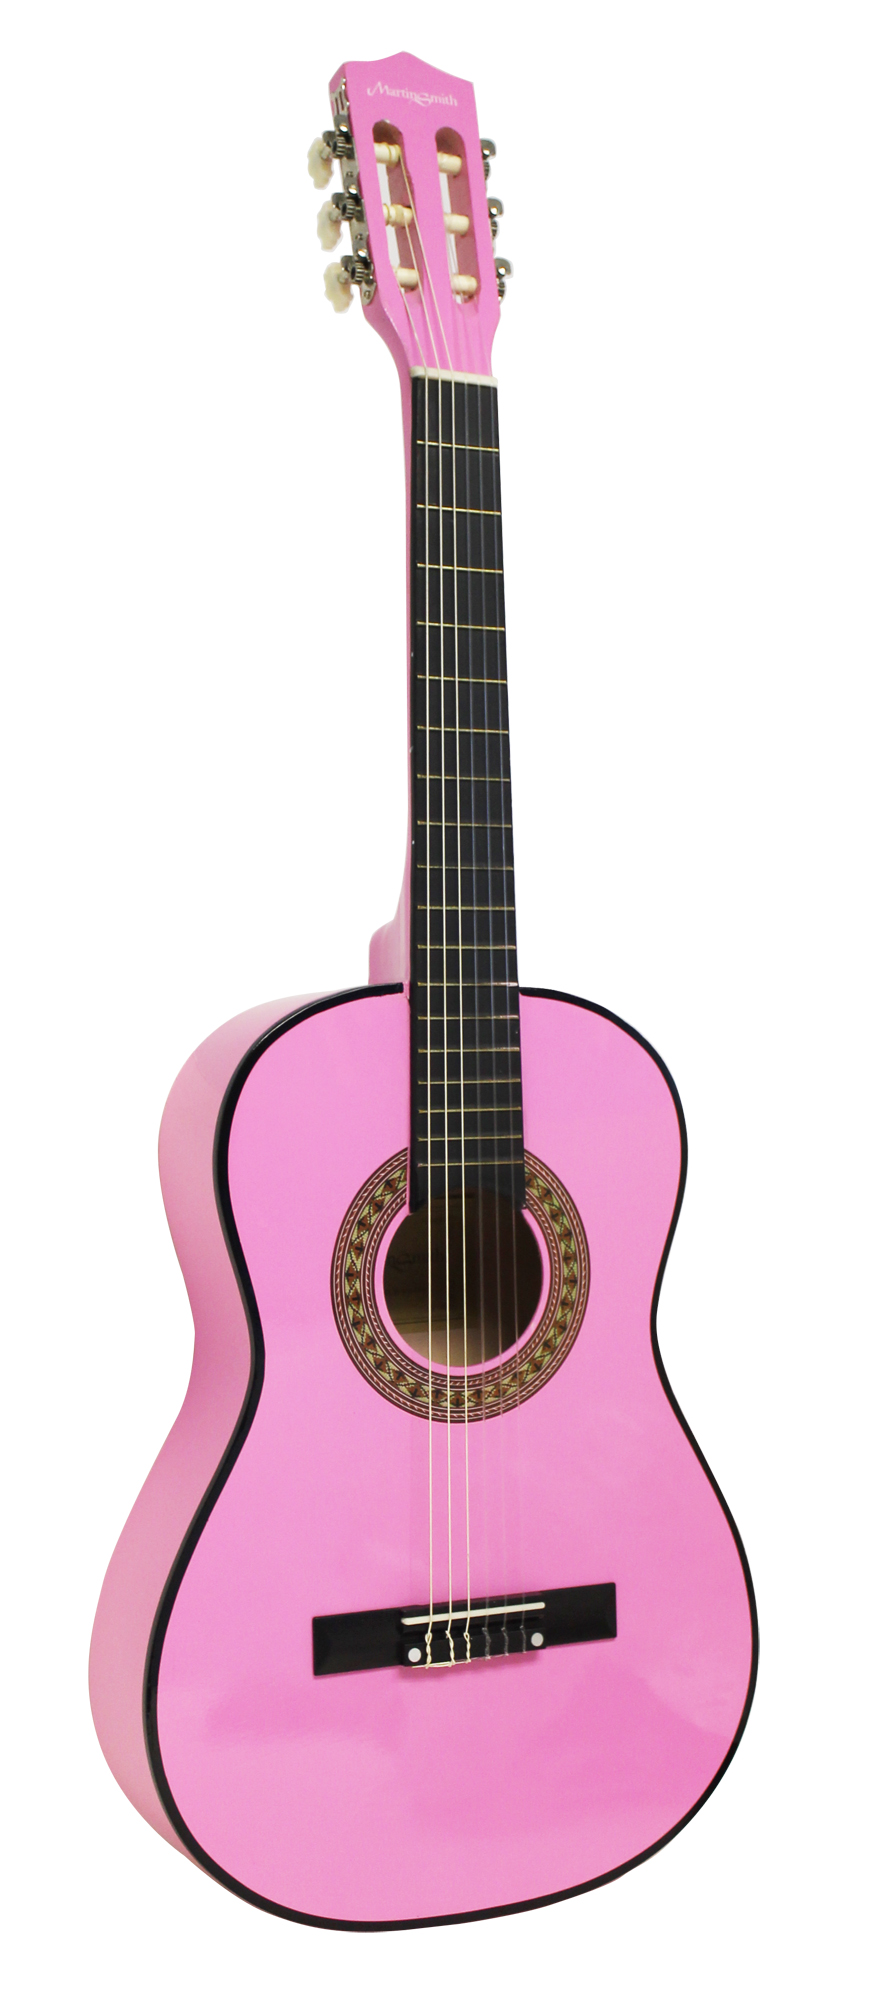 Photos - Other for Computer PDT Martin Smith Classical Guitar - Pink W-560-PNK